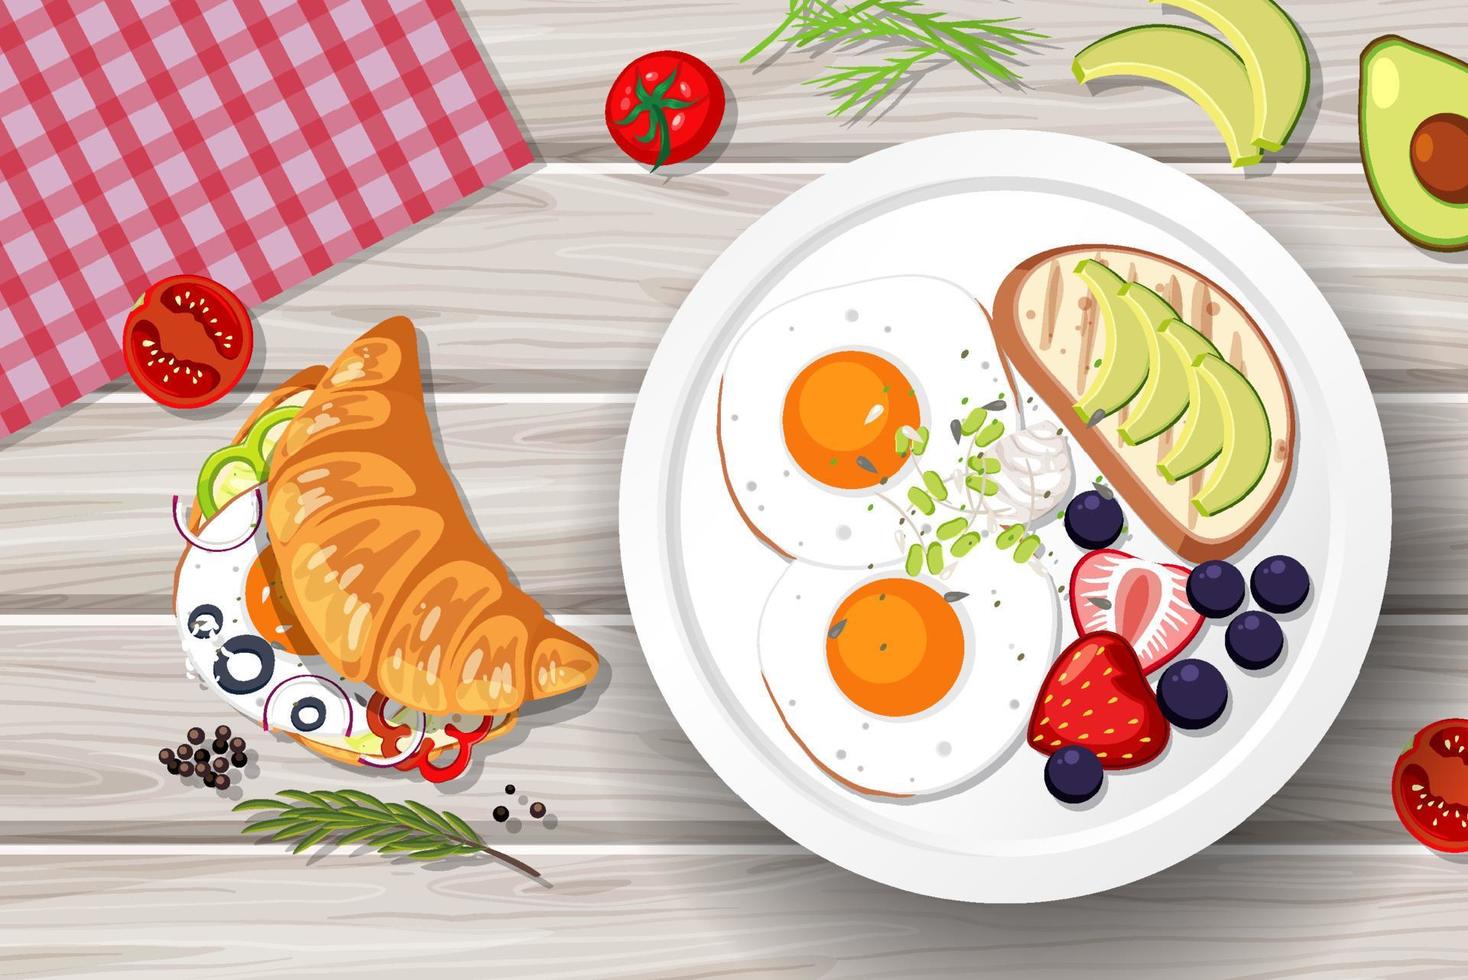 Breakfast set with vegetables on the table vector